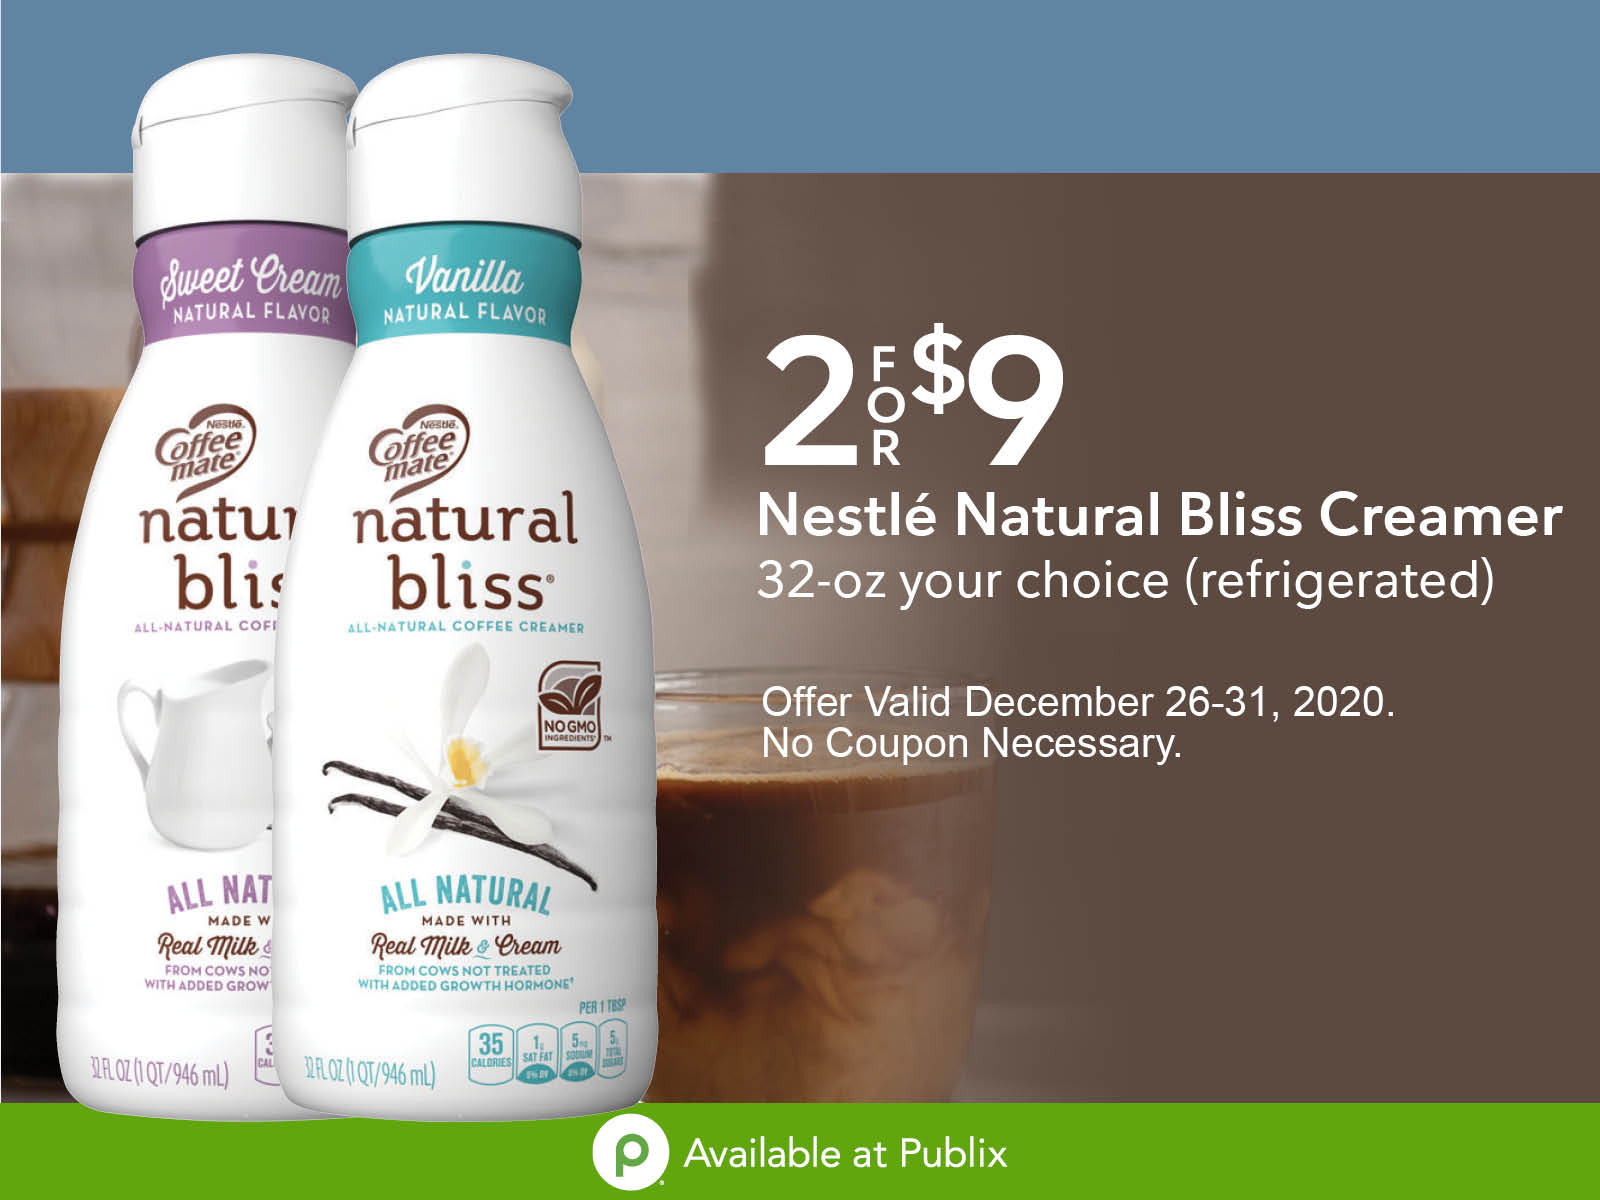 Nestle Natural Bliss Creamer Is On Sale At Publix